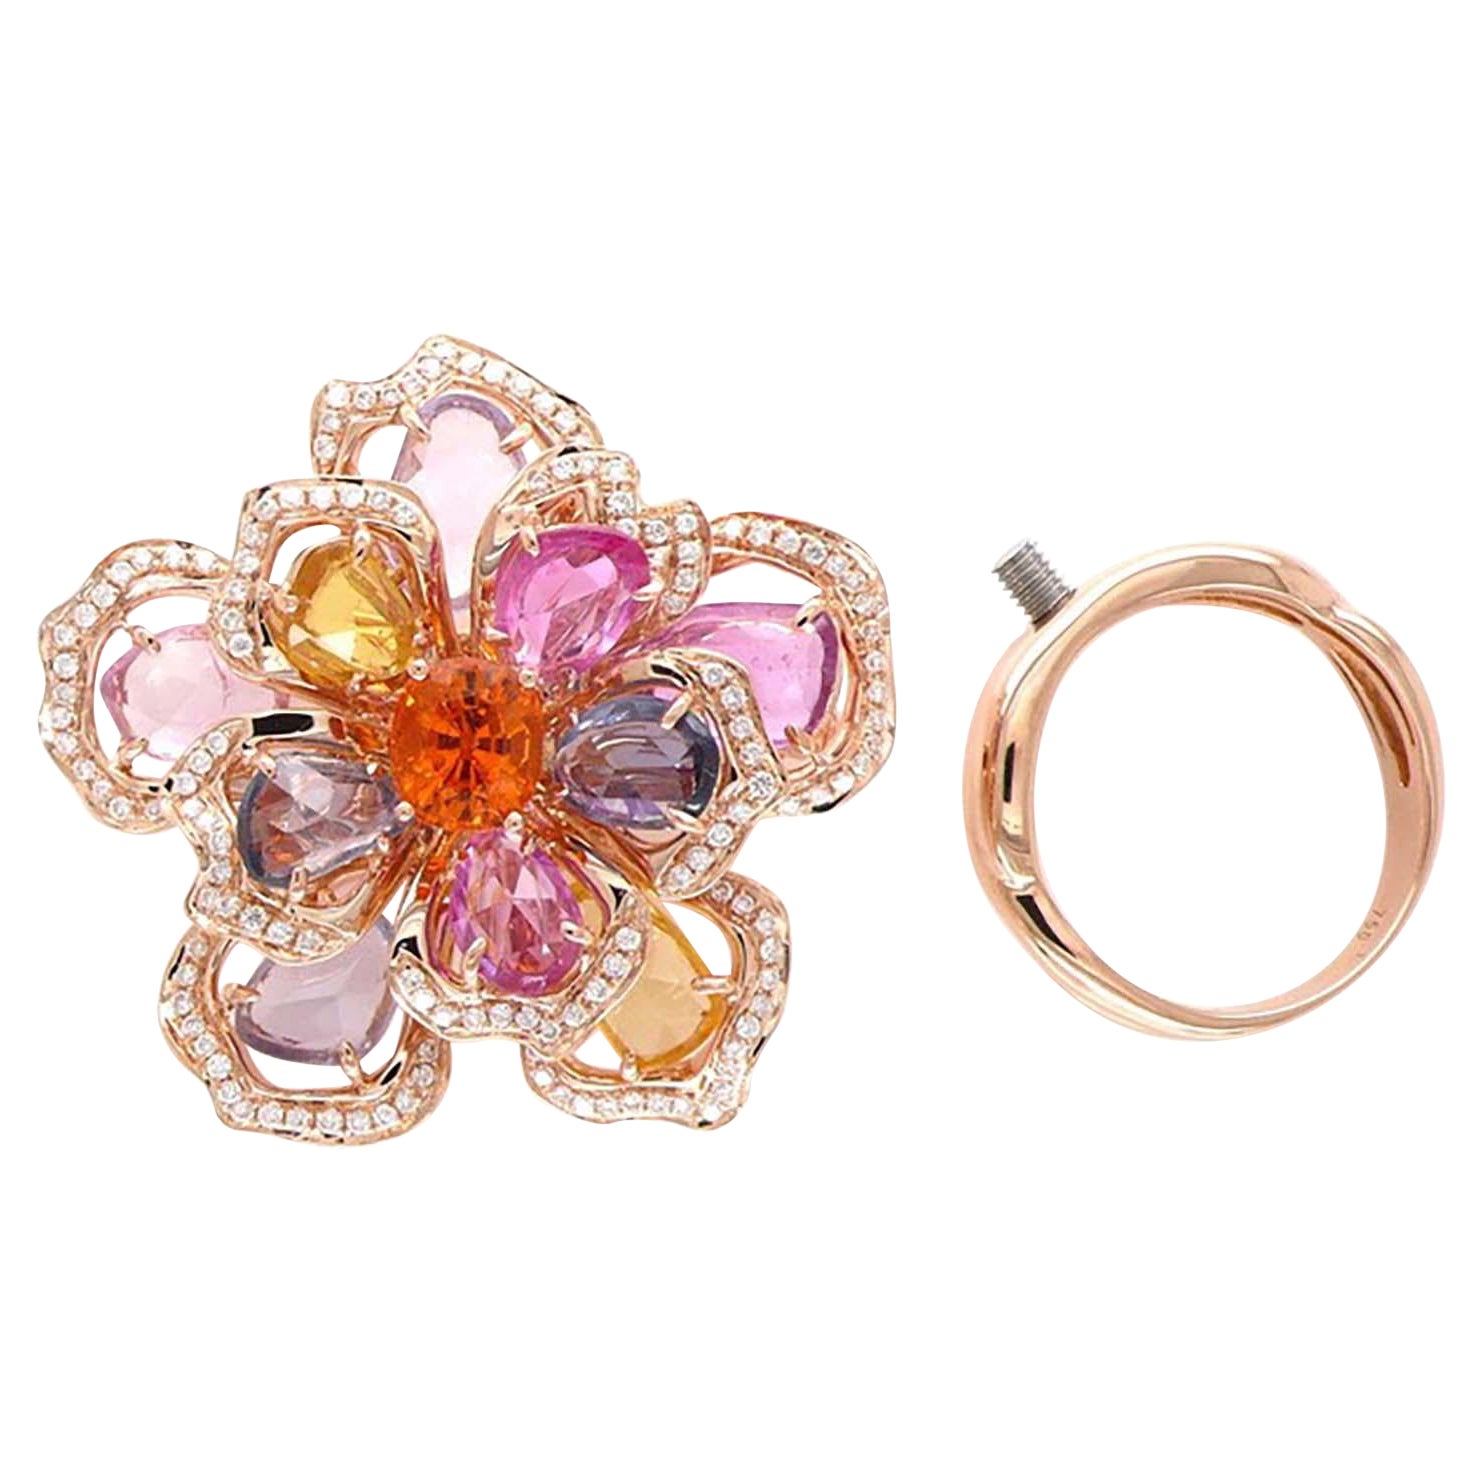 3in1 Flower Collection Pendant Brooch Ring with Multicolor and Mandarin Sapphire